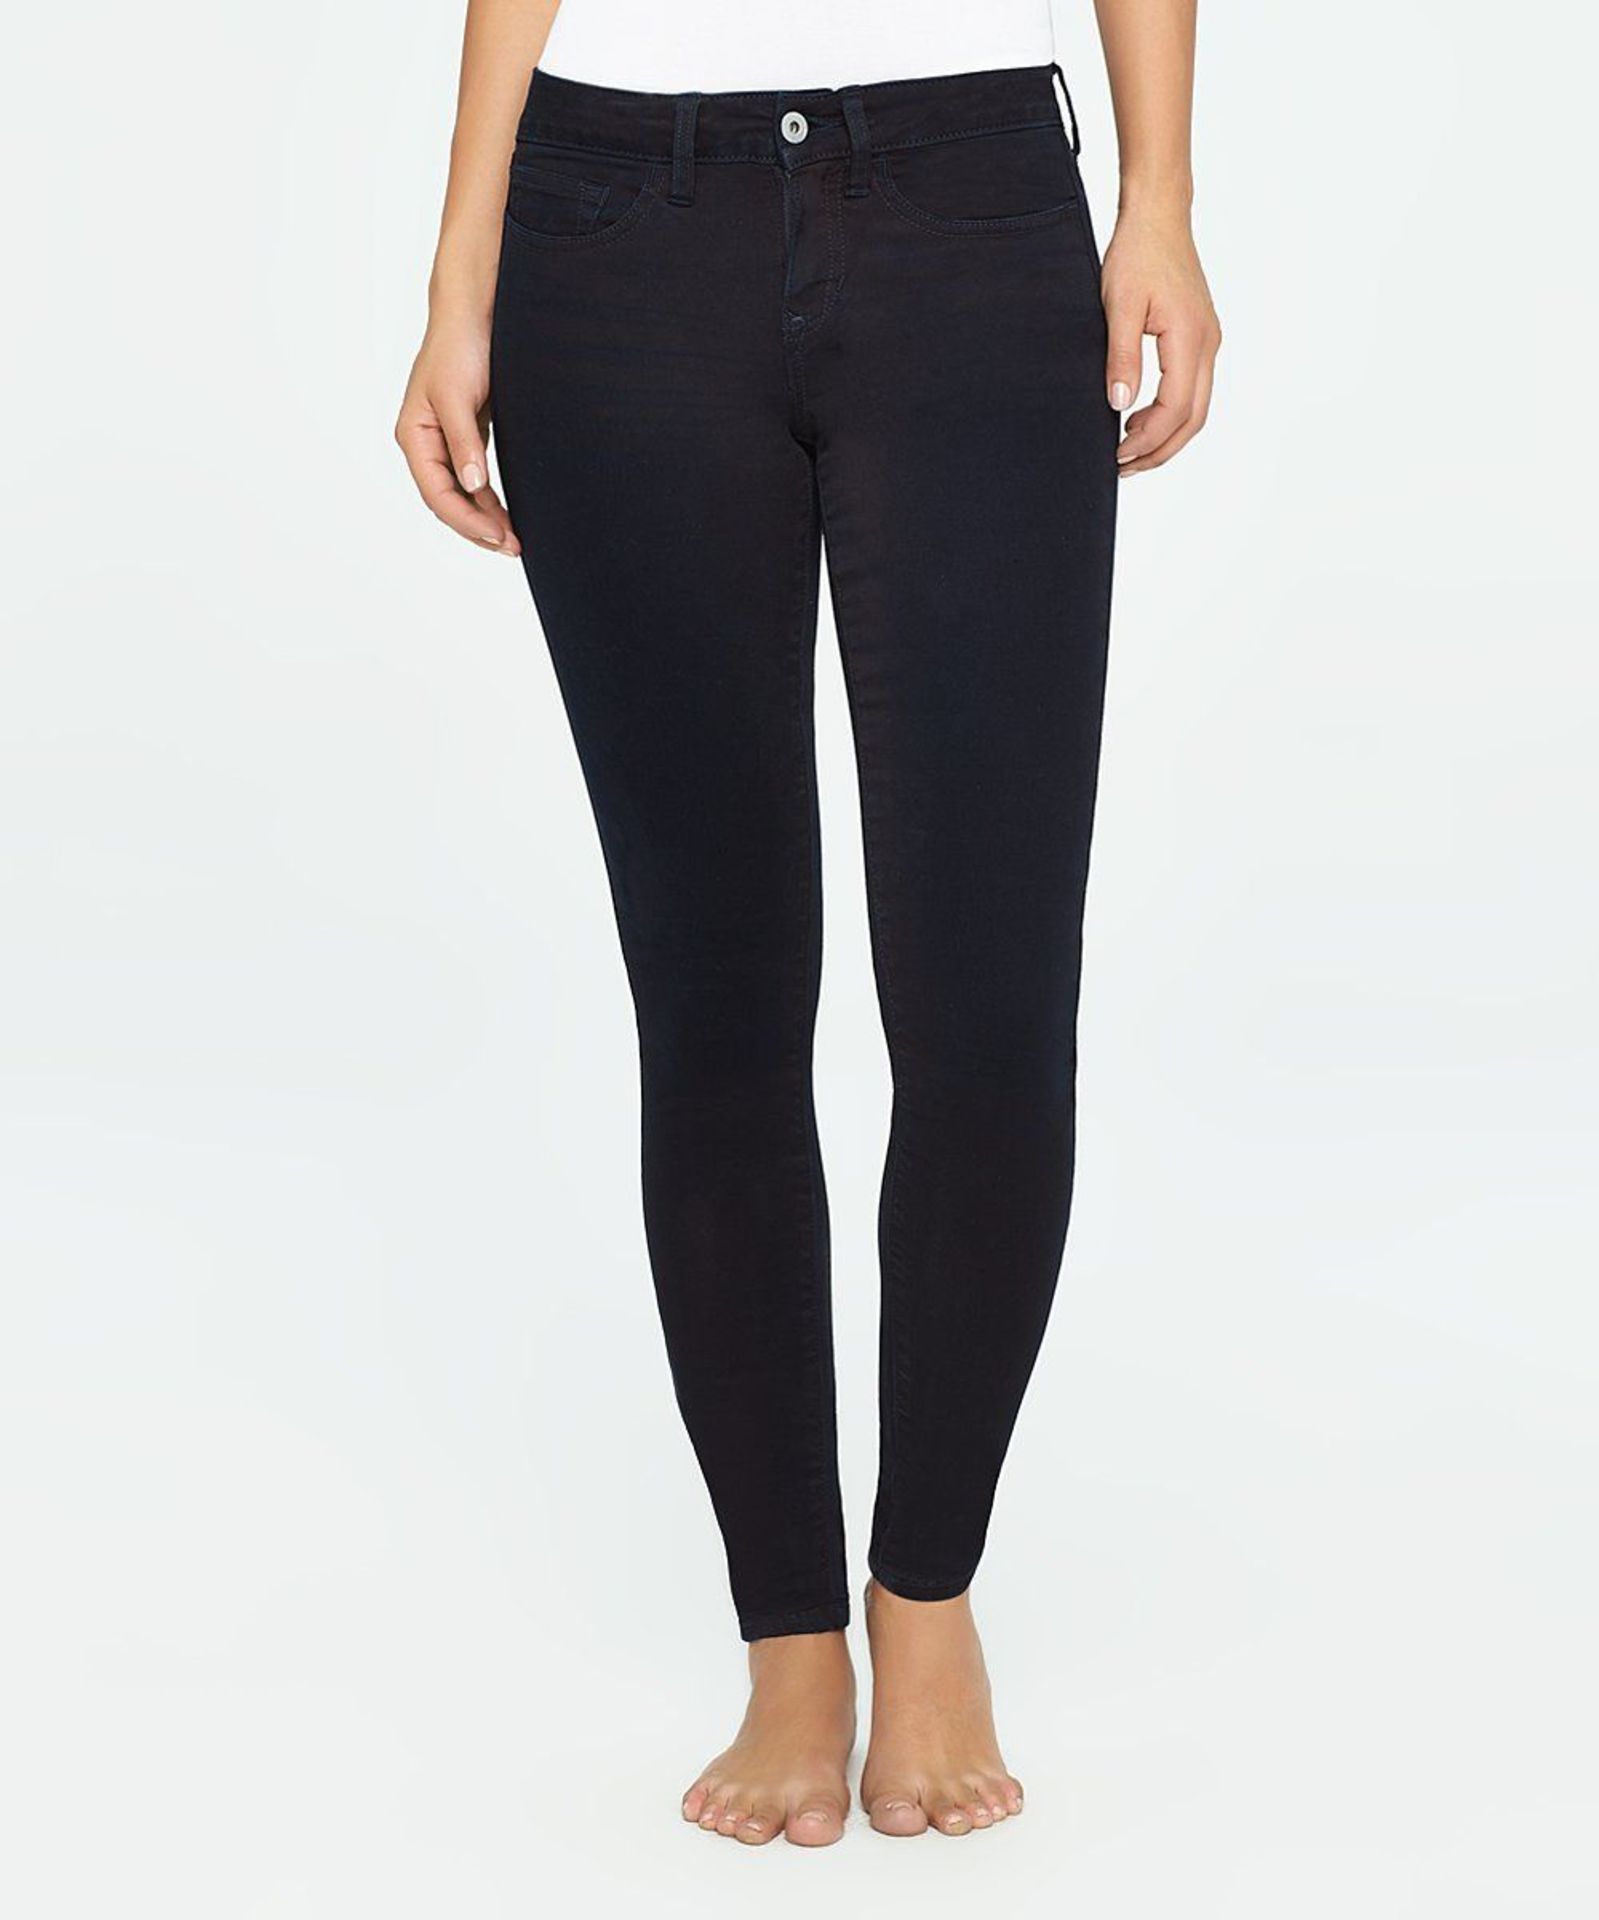 Yummie by Heather Thompson Nightfall Super Skinny Jeans (Size 25) (New with tags) [Ref: 32734279- - Image 3 of 3